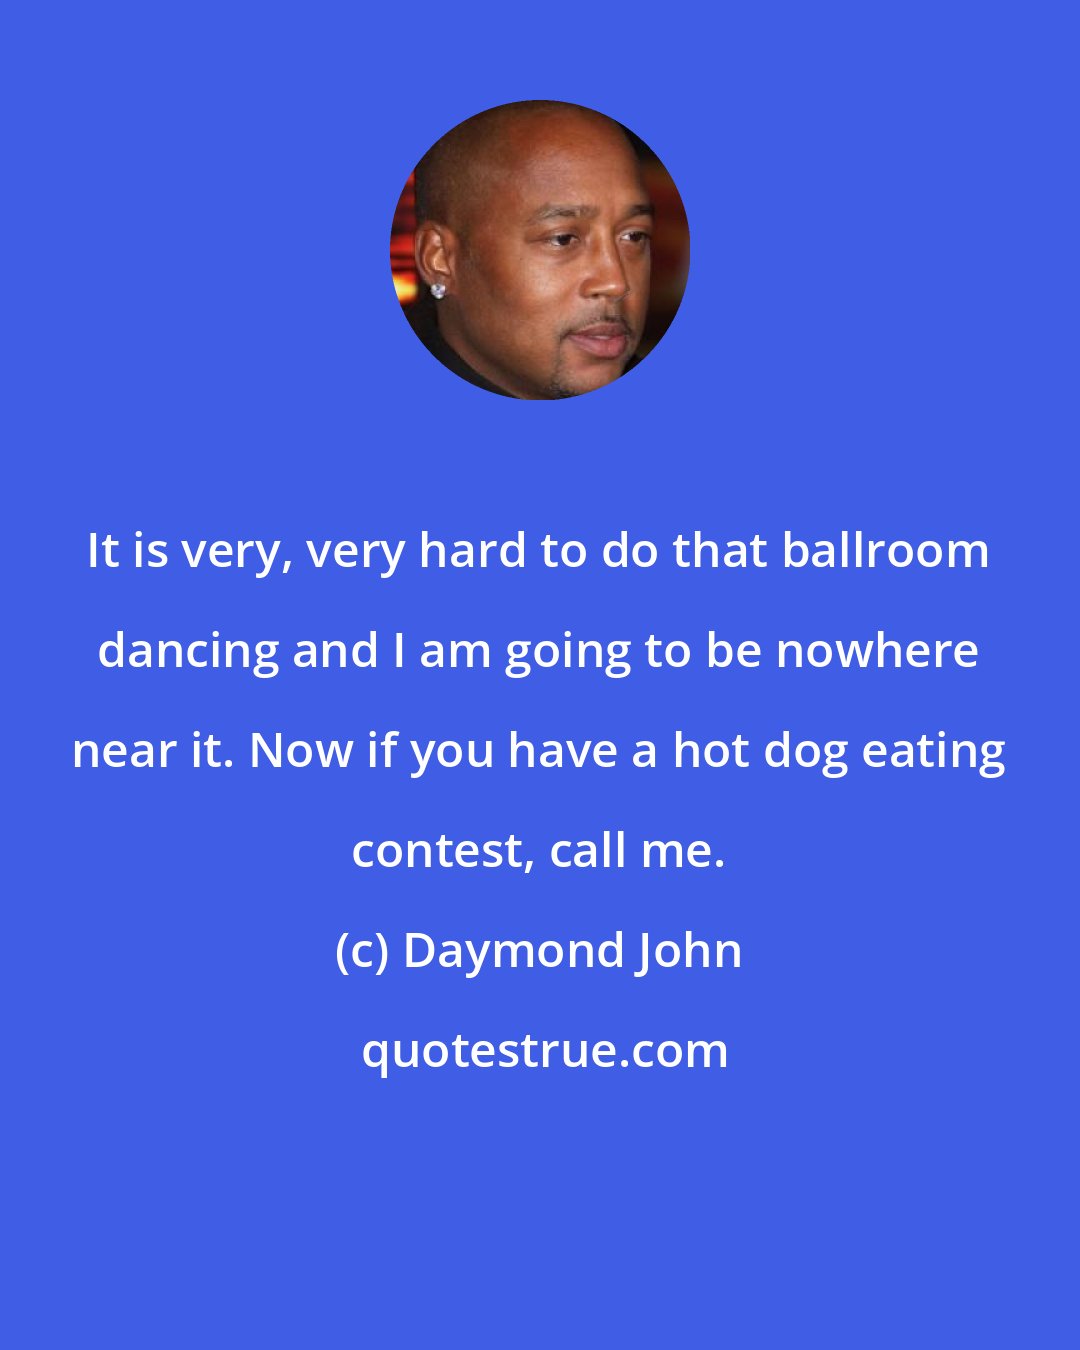 Daymond John: It is very, very hard to do that ballroom dancing and I am going to be nowhere near it. Now if you have a hot dog eating contest, call me.